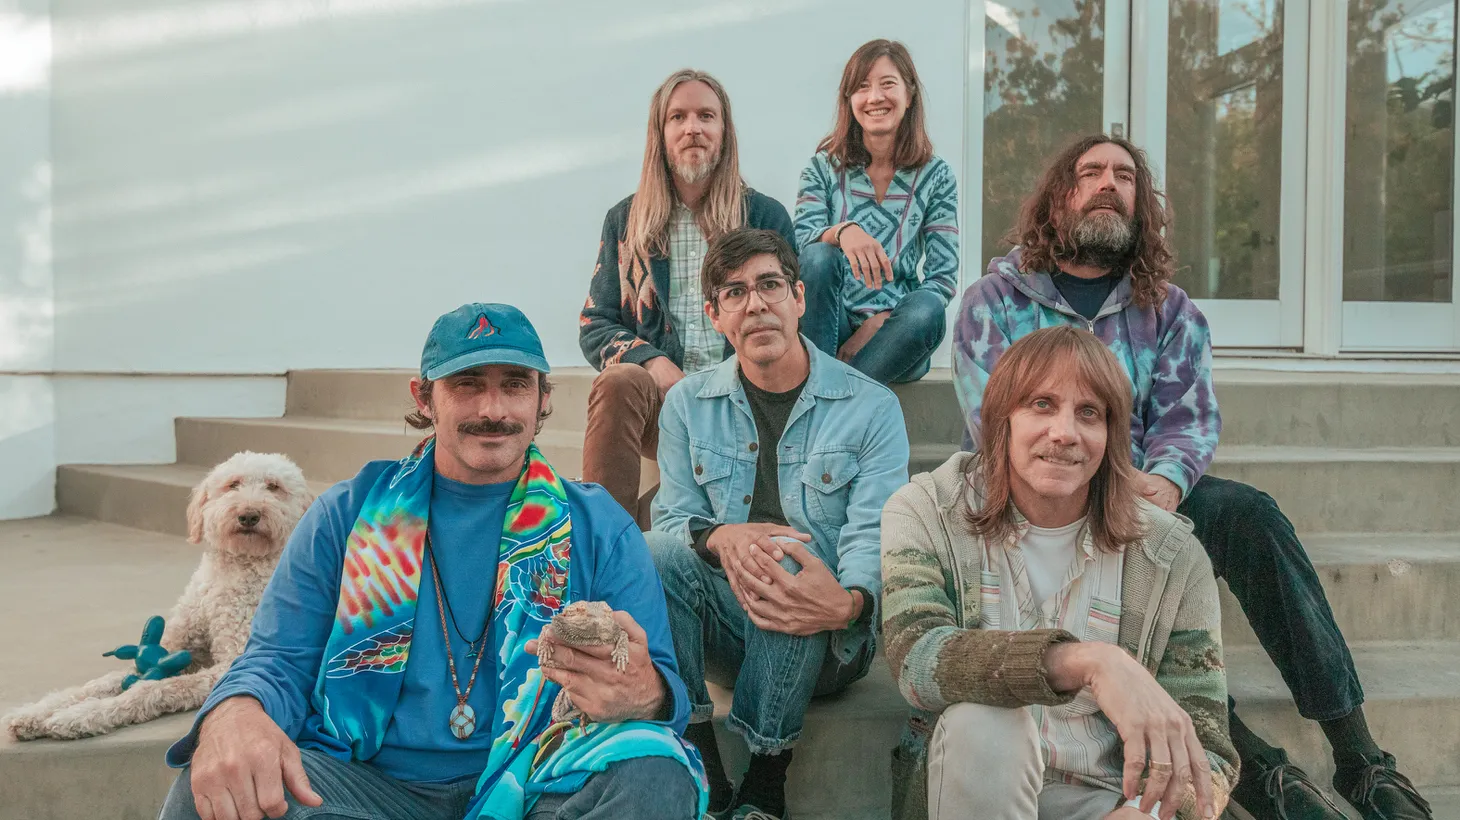 We have a new song for you from the canyons of Southern California, courtesy of our old friends Beachwood Sparks , who are known to echo the cosmic fervor of The Byrds’ legendary sound.